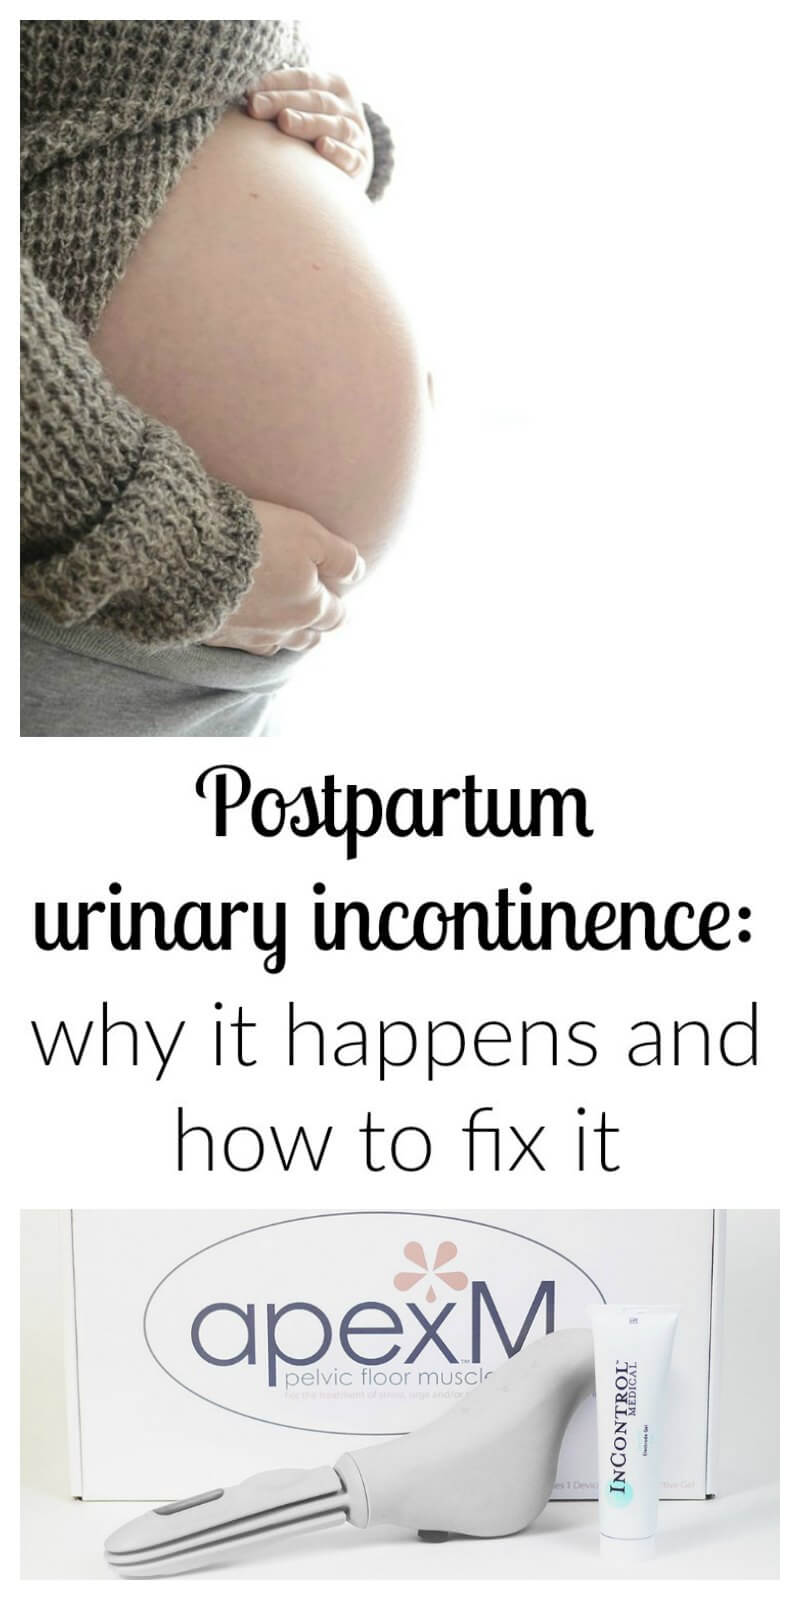 Did you know that postpartum urinary incontinence is very common? But, there's no need for you to suffer - there are ways you can cure urinary incontinence without using medications. Click the post to find out how.